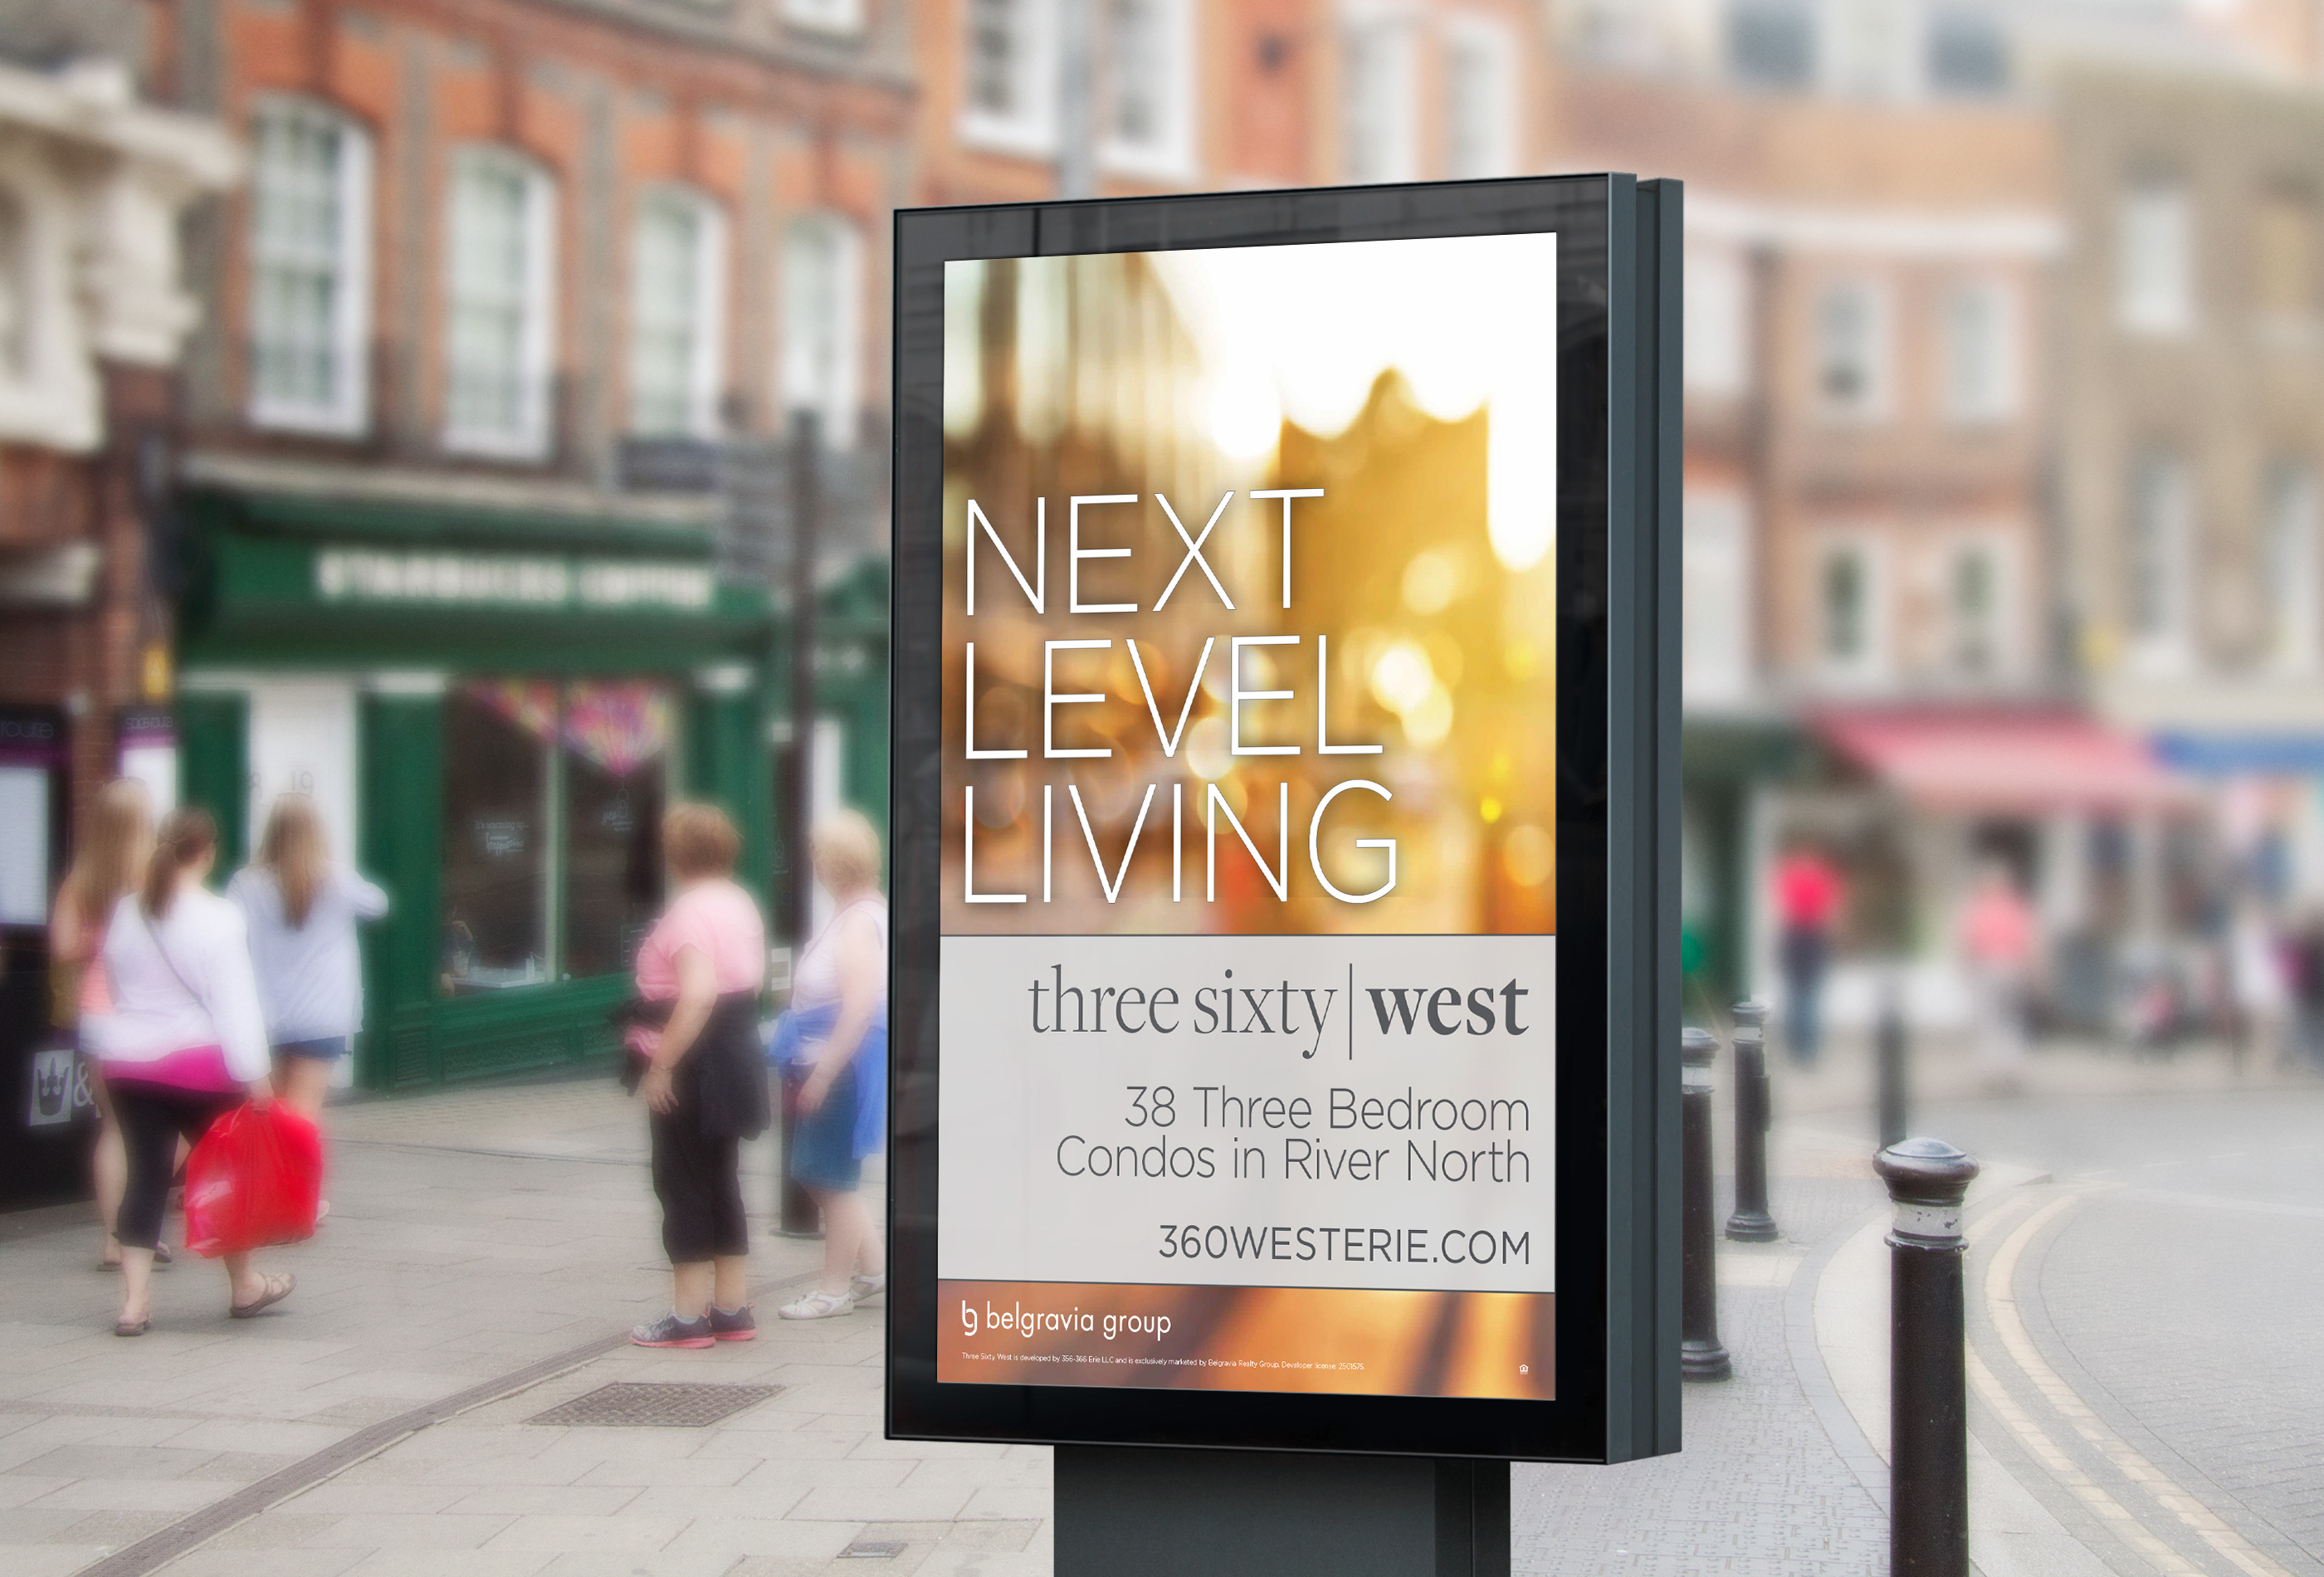 Outdoor advertising signage for Three Sixty West that reads "next level living"